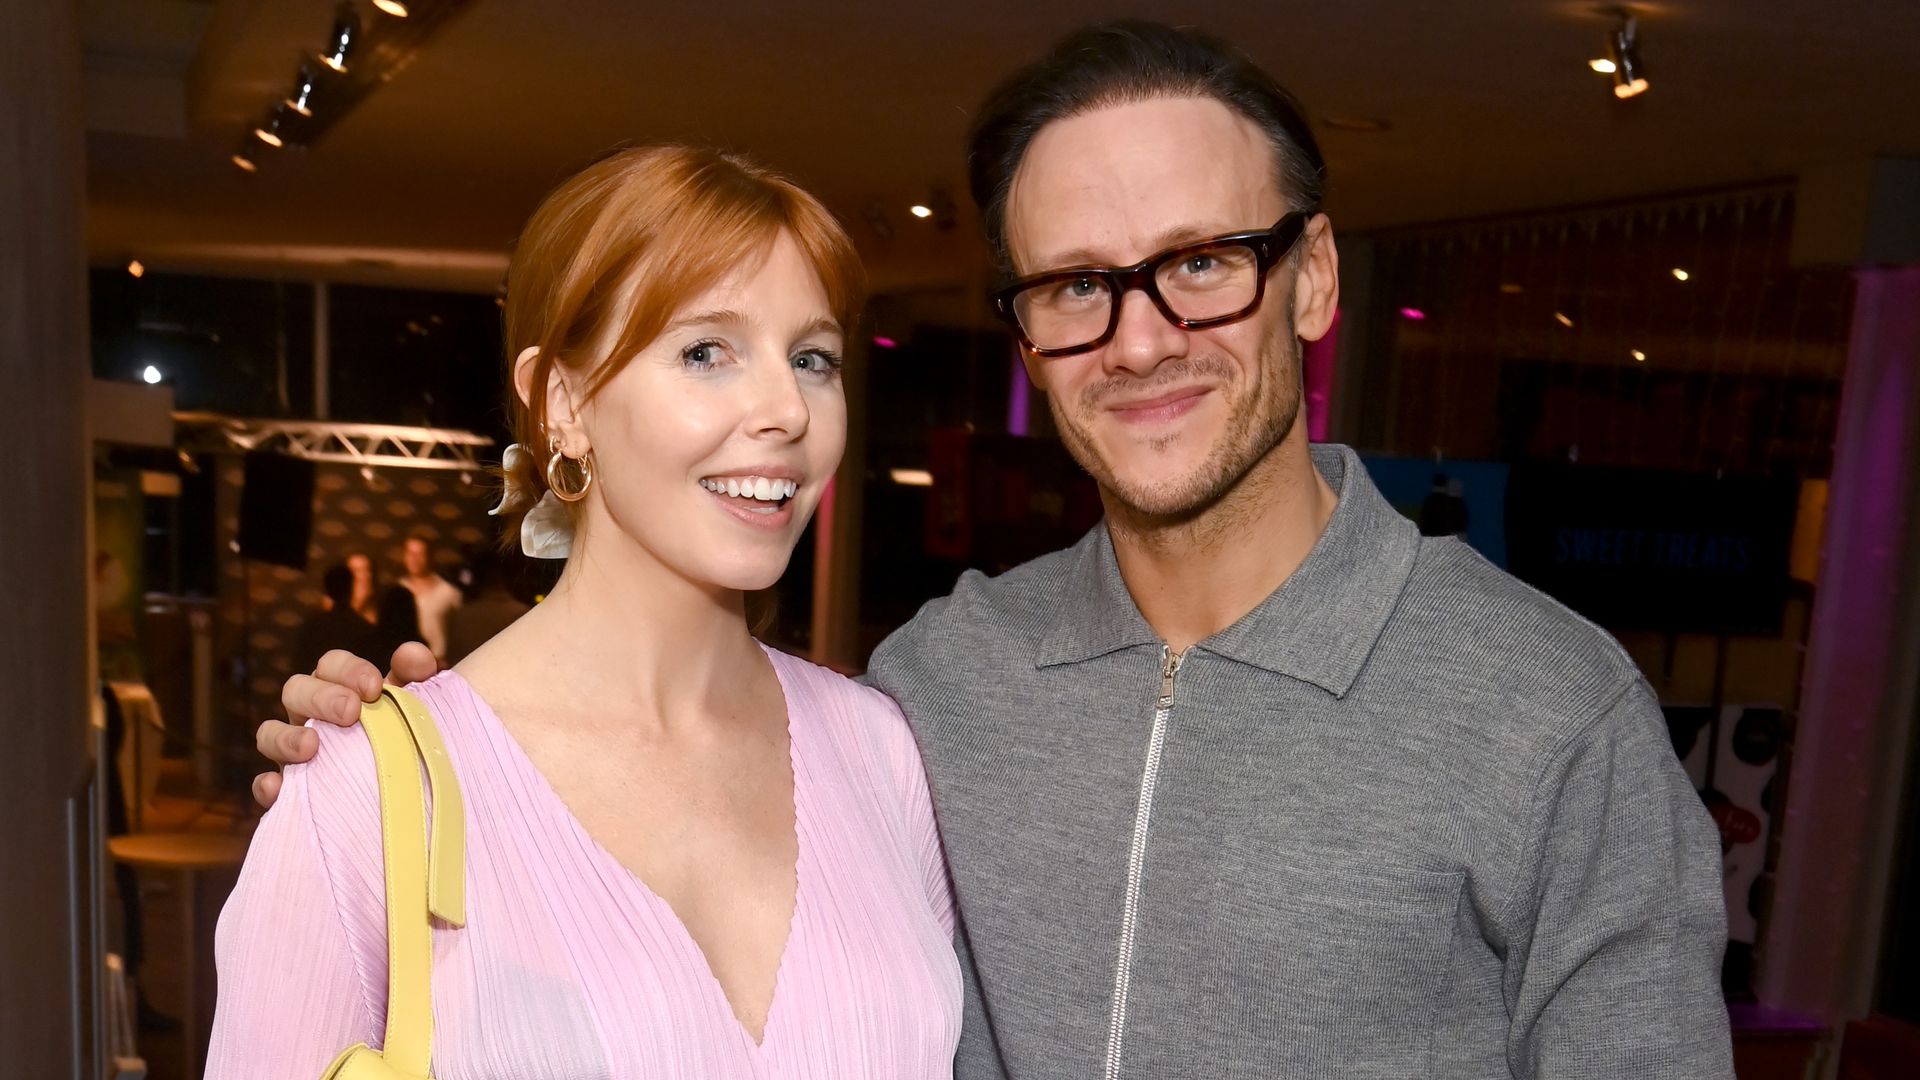 Stacey Dooley and Kevin Clifton attend the Strictly Ballroom after party 